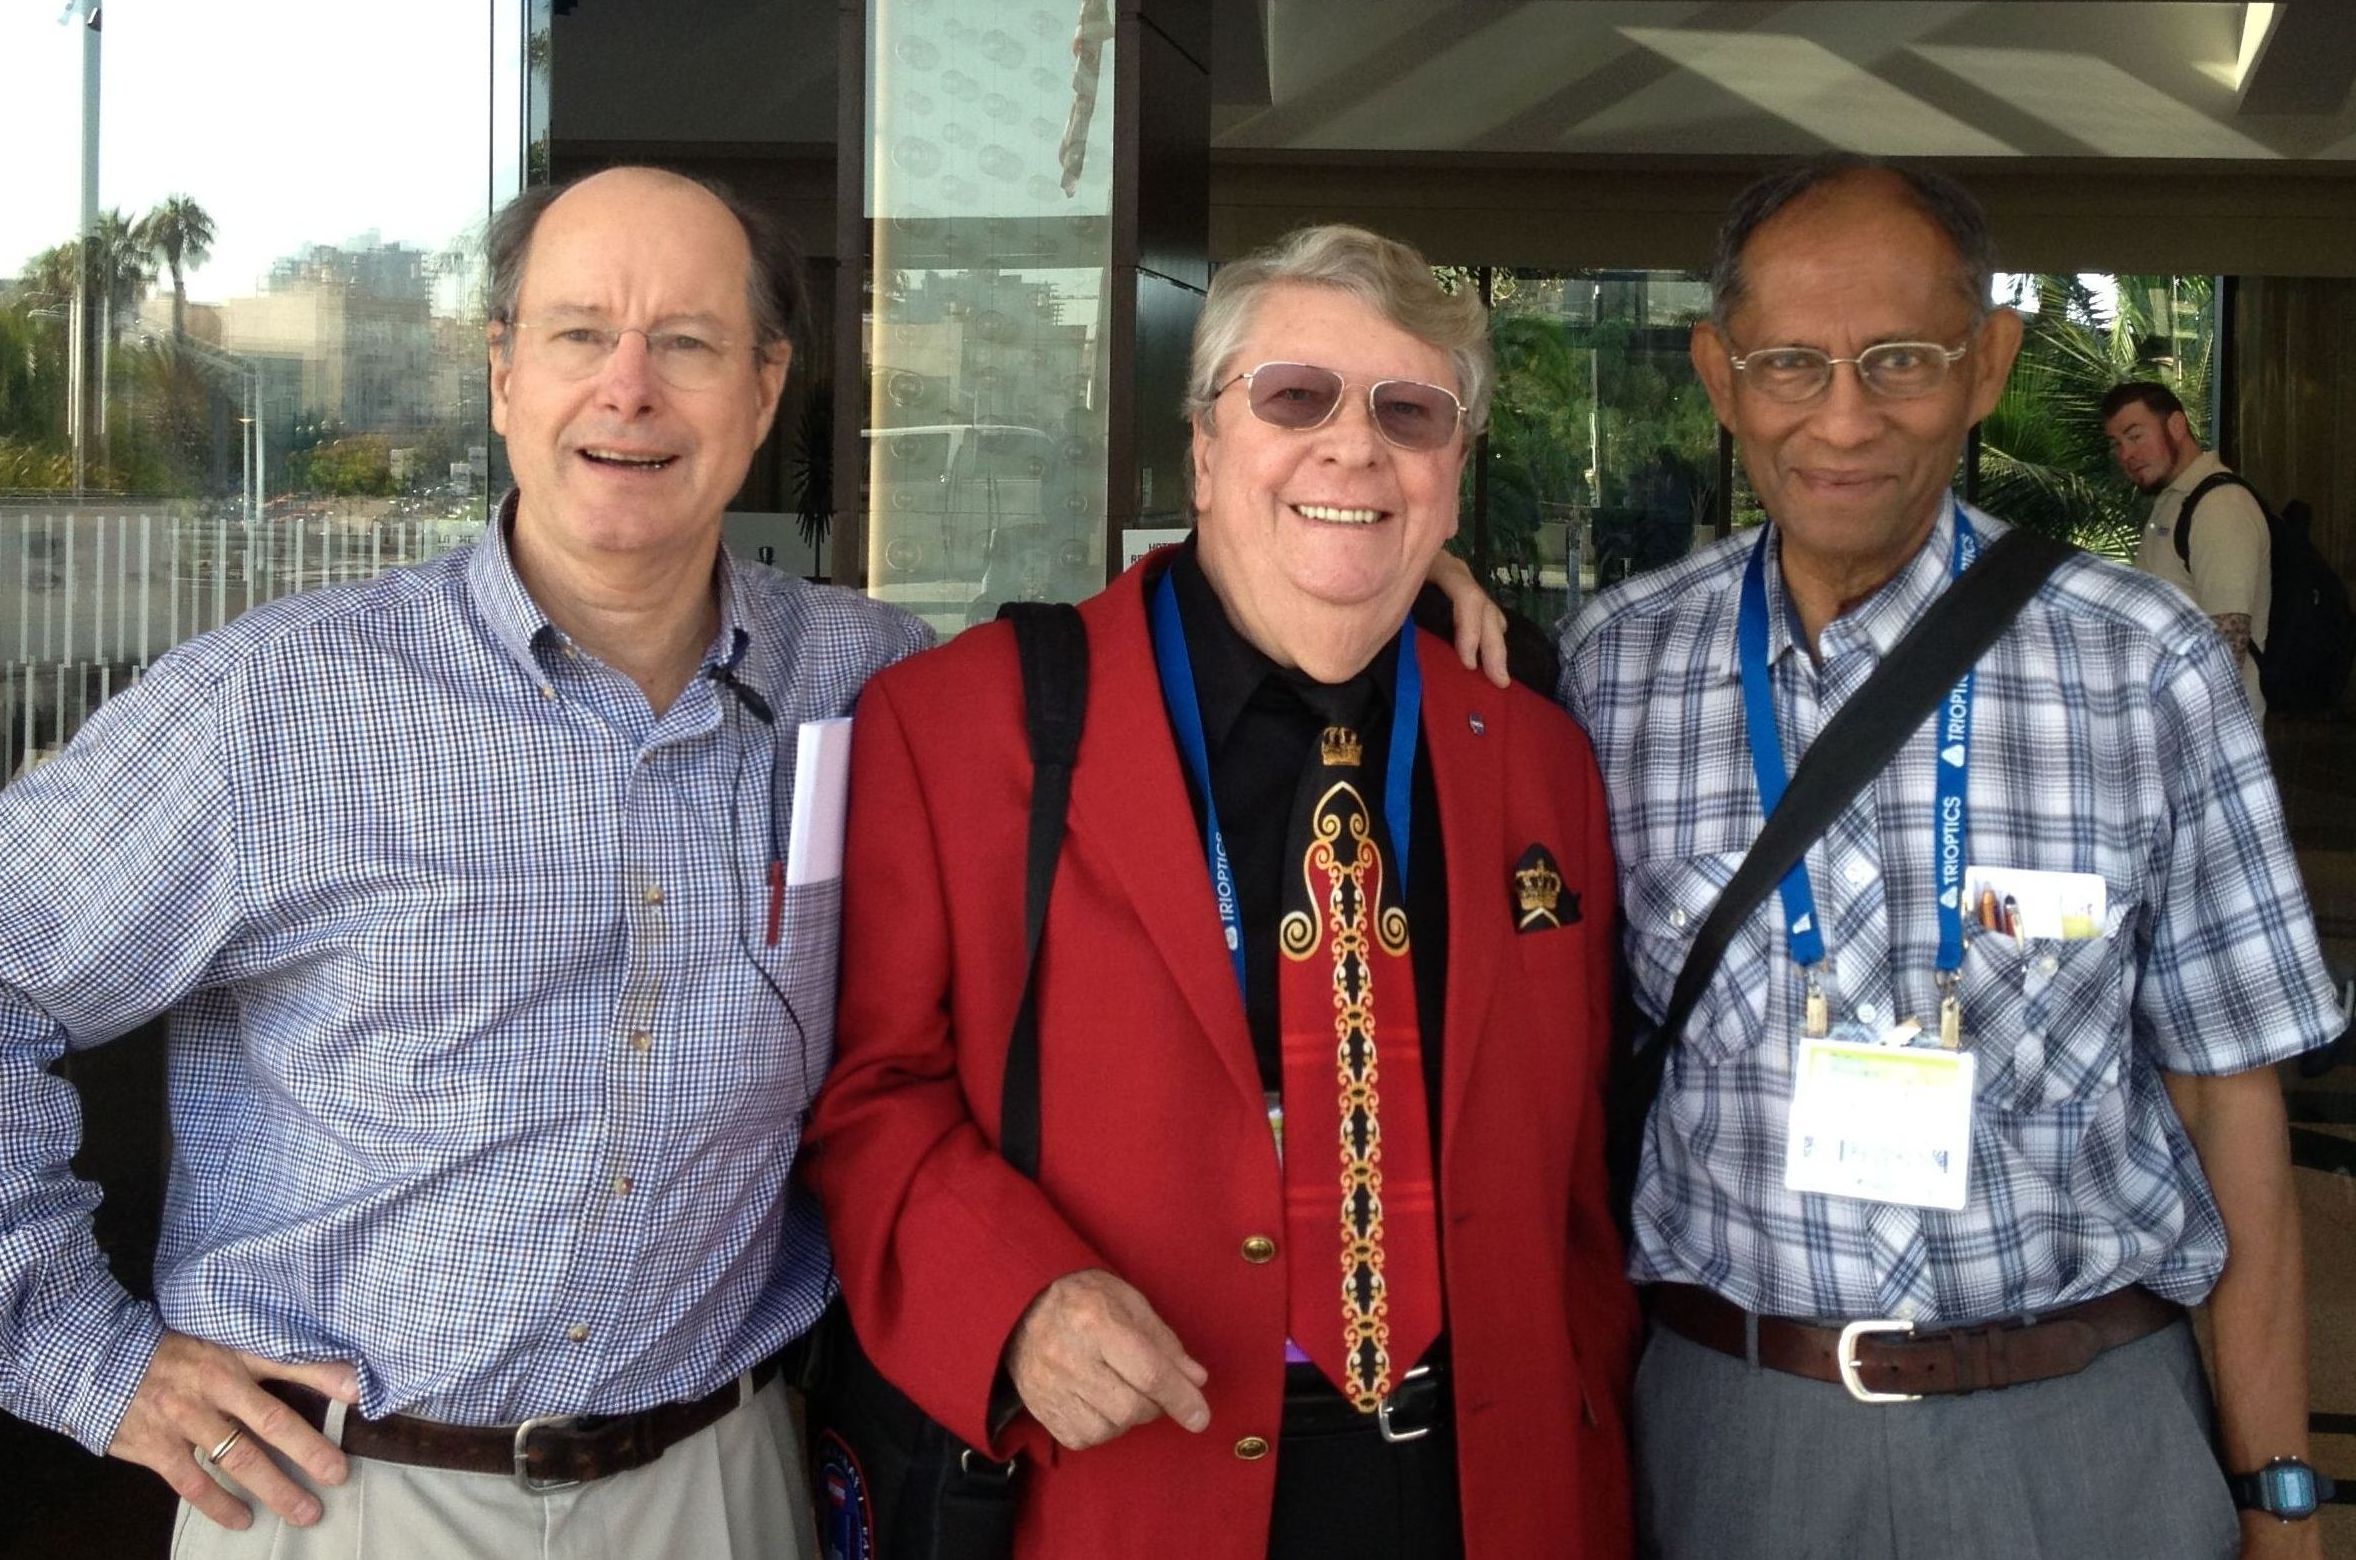 Brig Klyce, Richard Hoover, Chandra Wickramasinghe at the SPIE Convention, 28 Aug 2013. Date was in my cellphone!